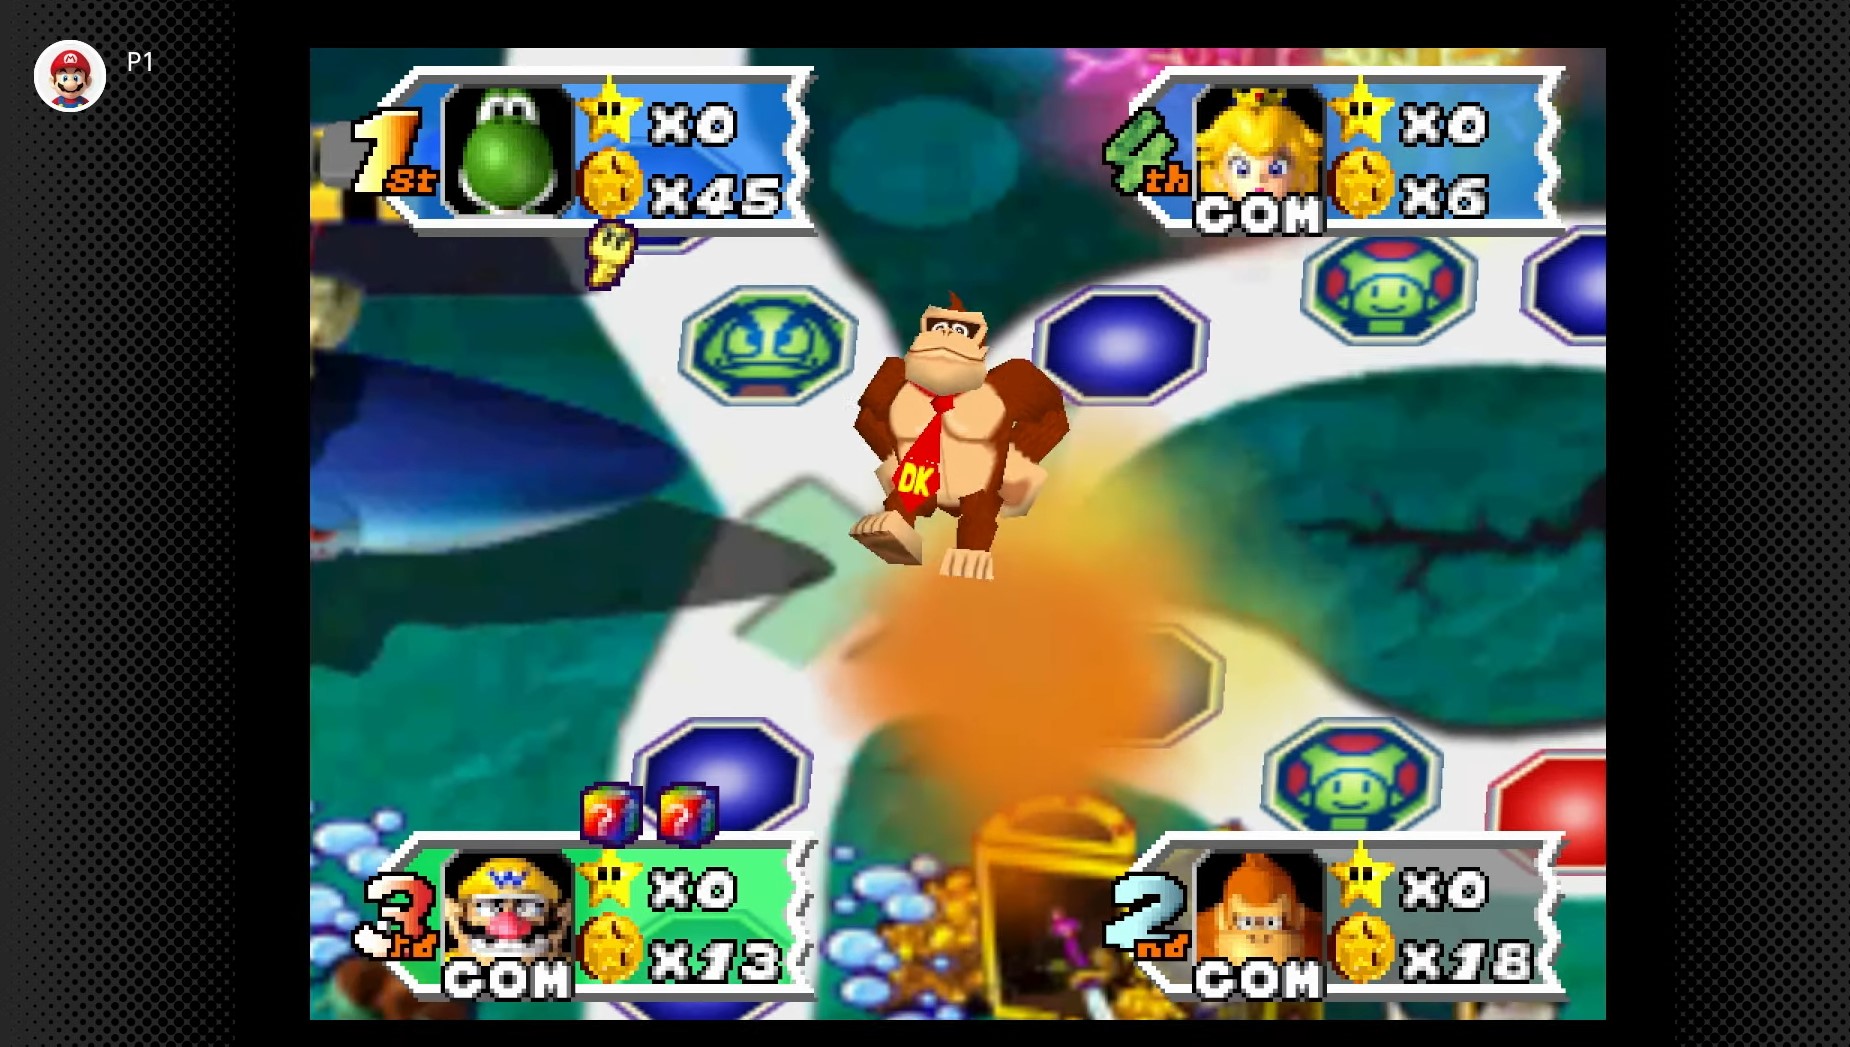 Mario Party 3 Comes to Nintendo Switch Online This Week